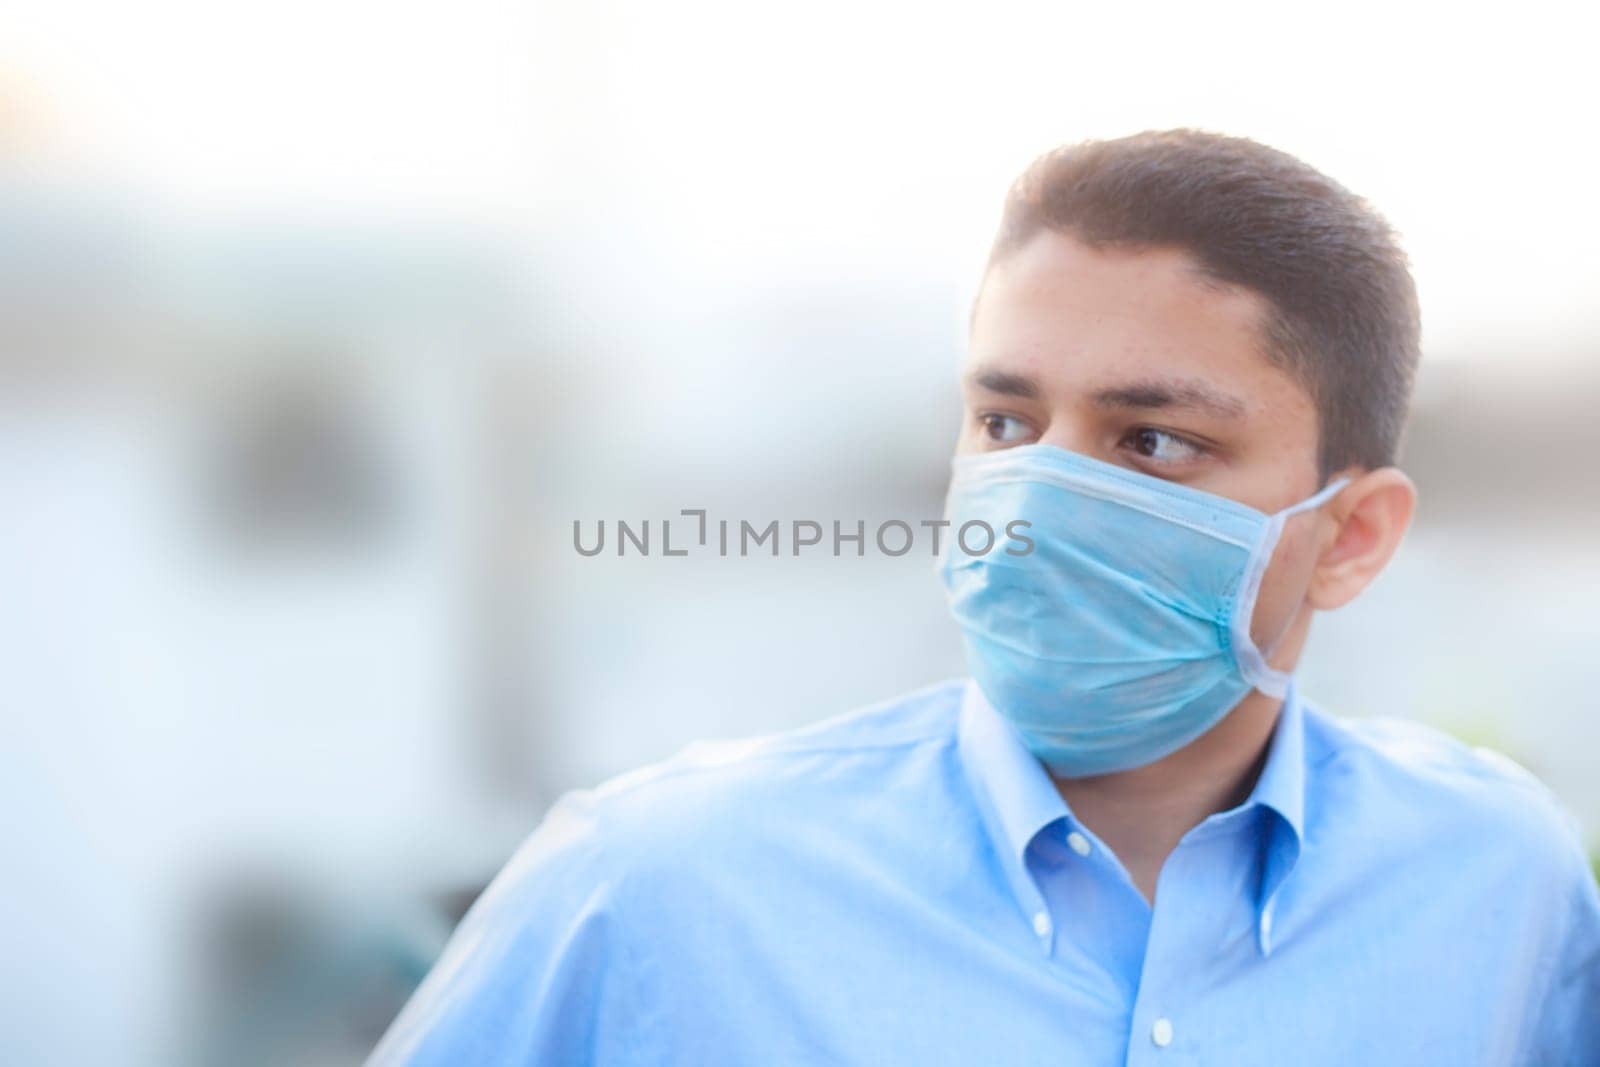 Portrait shot of a young man in a blue colored shirt and wearing a surgical mask or a procedure mask with blurred background. by mirzamlk